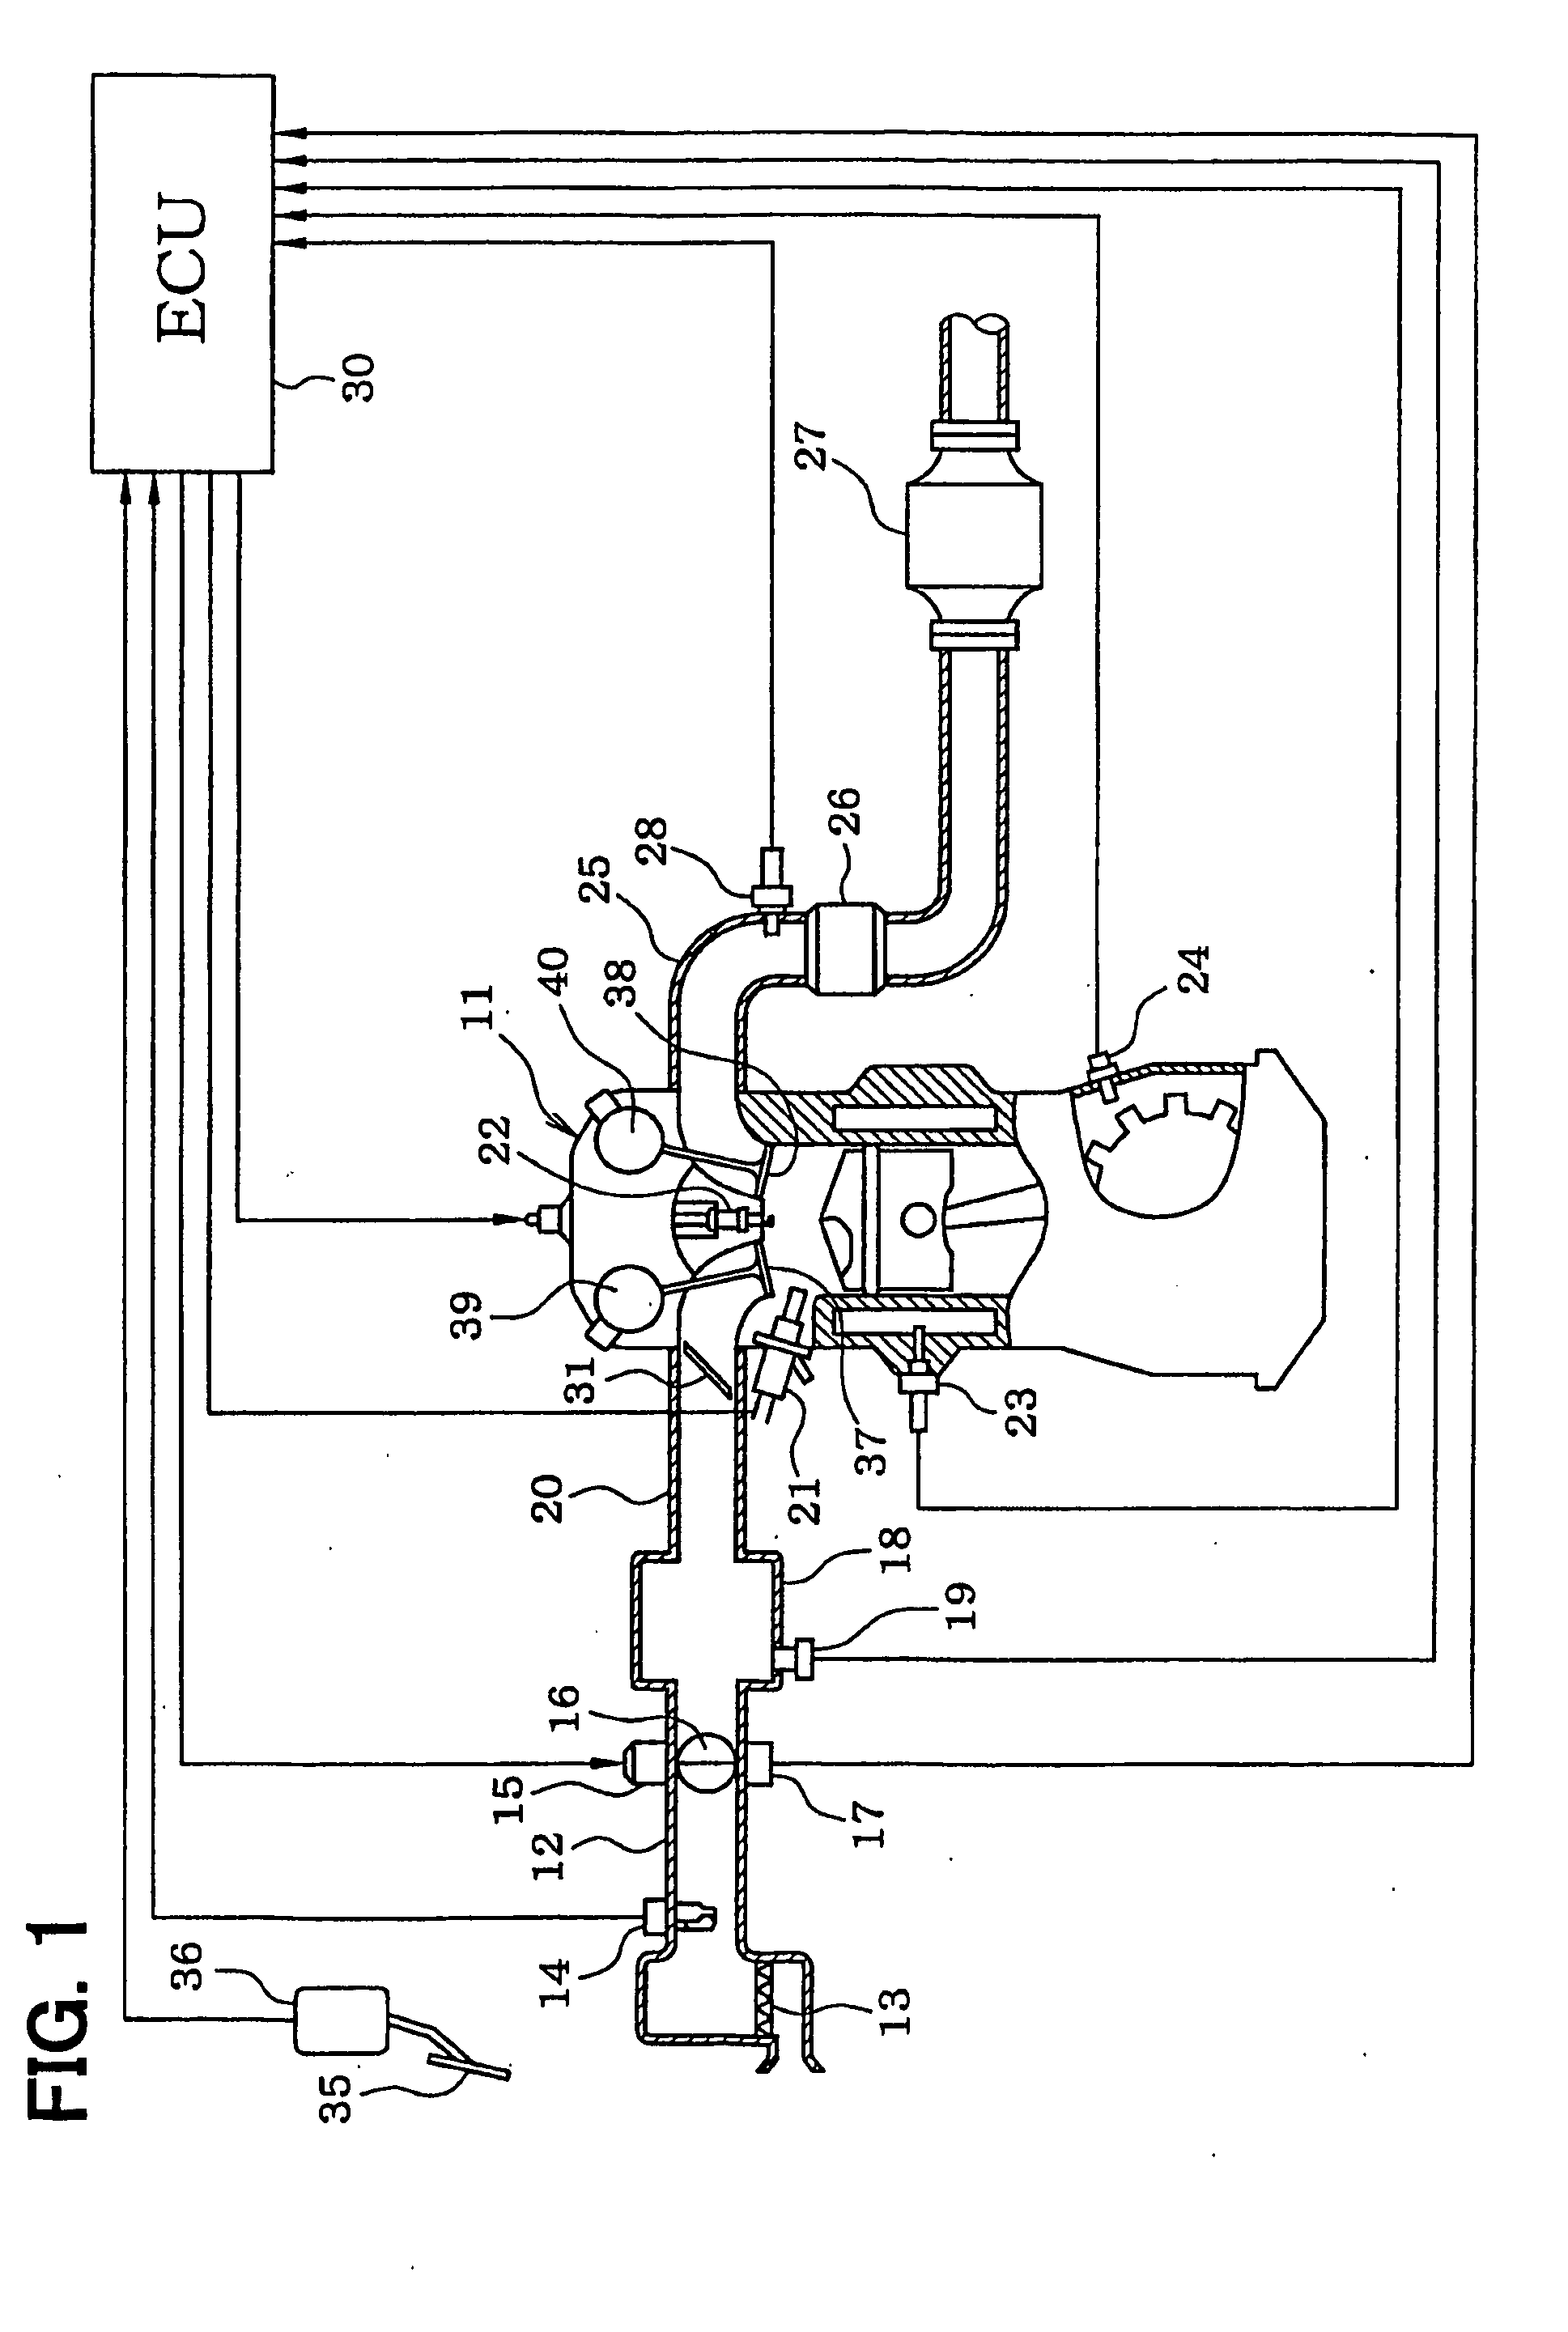 Control Apparatus for Vehicle